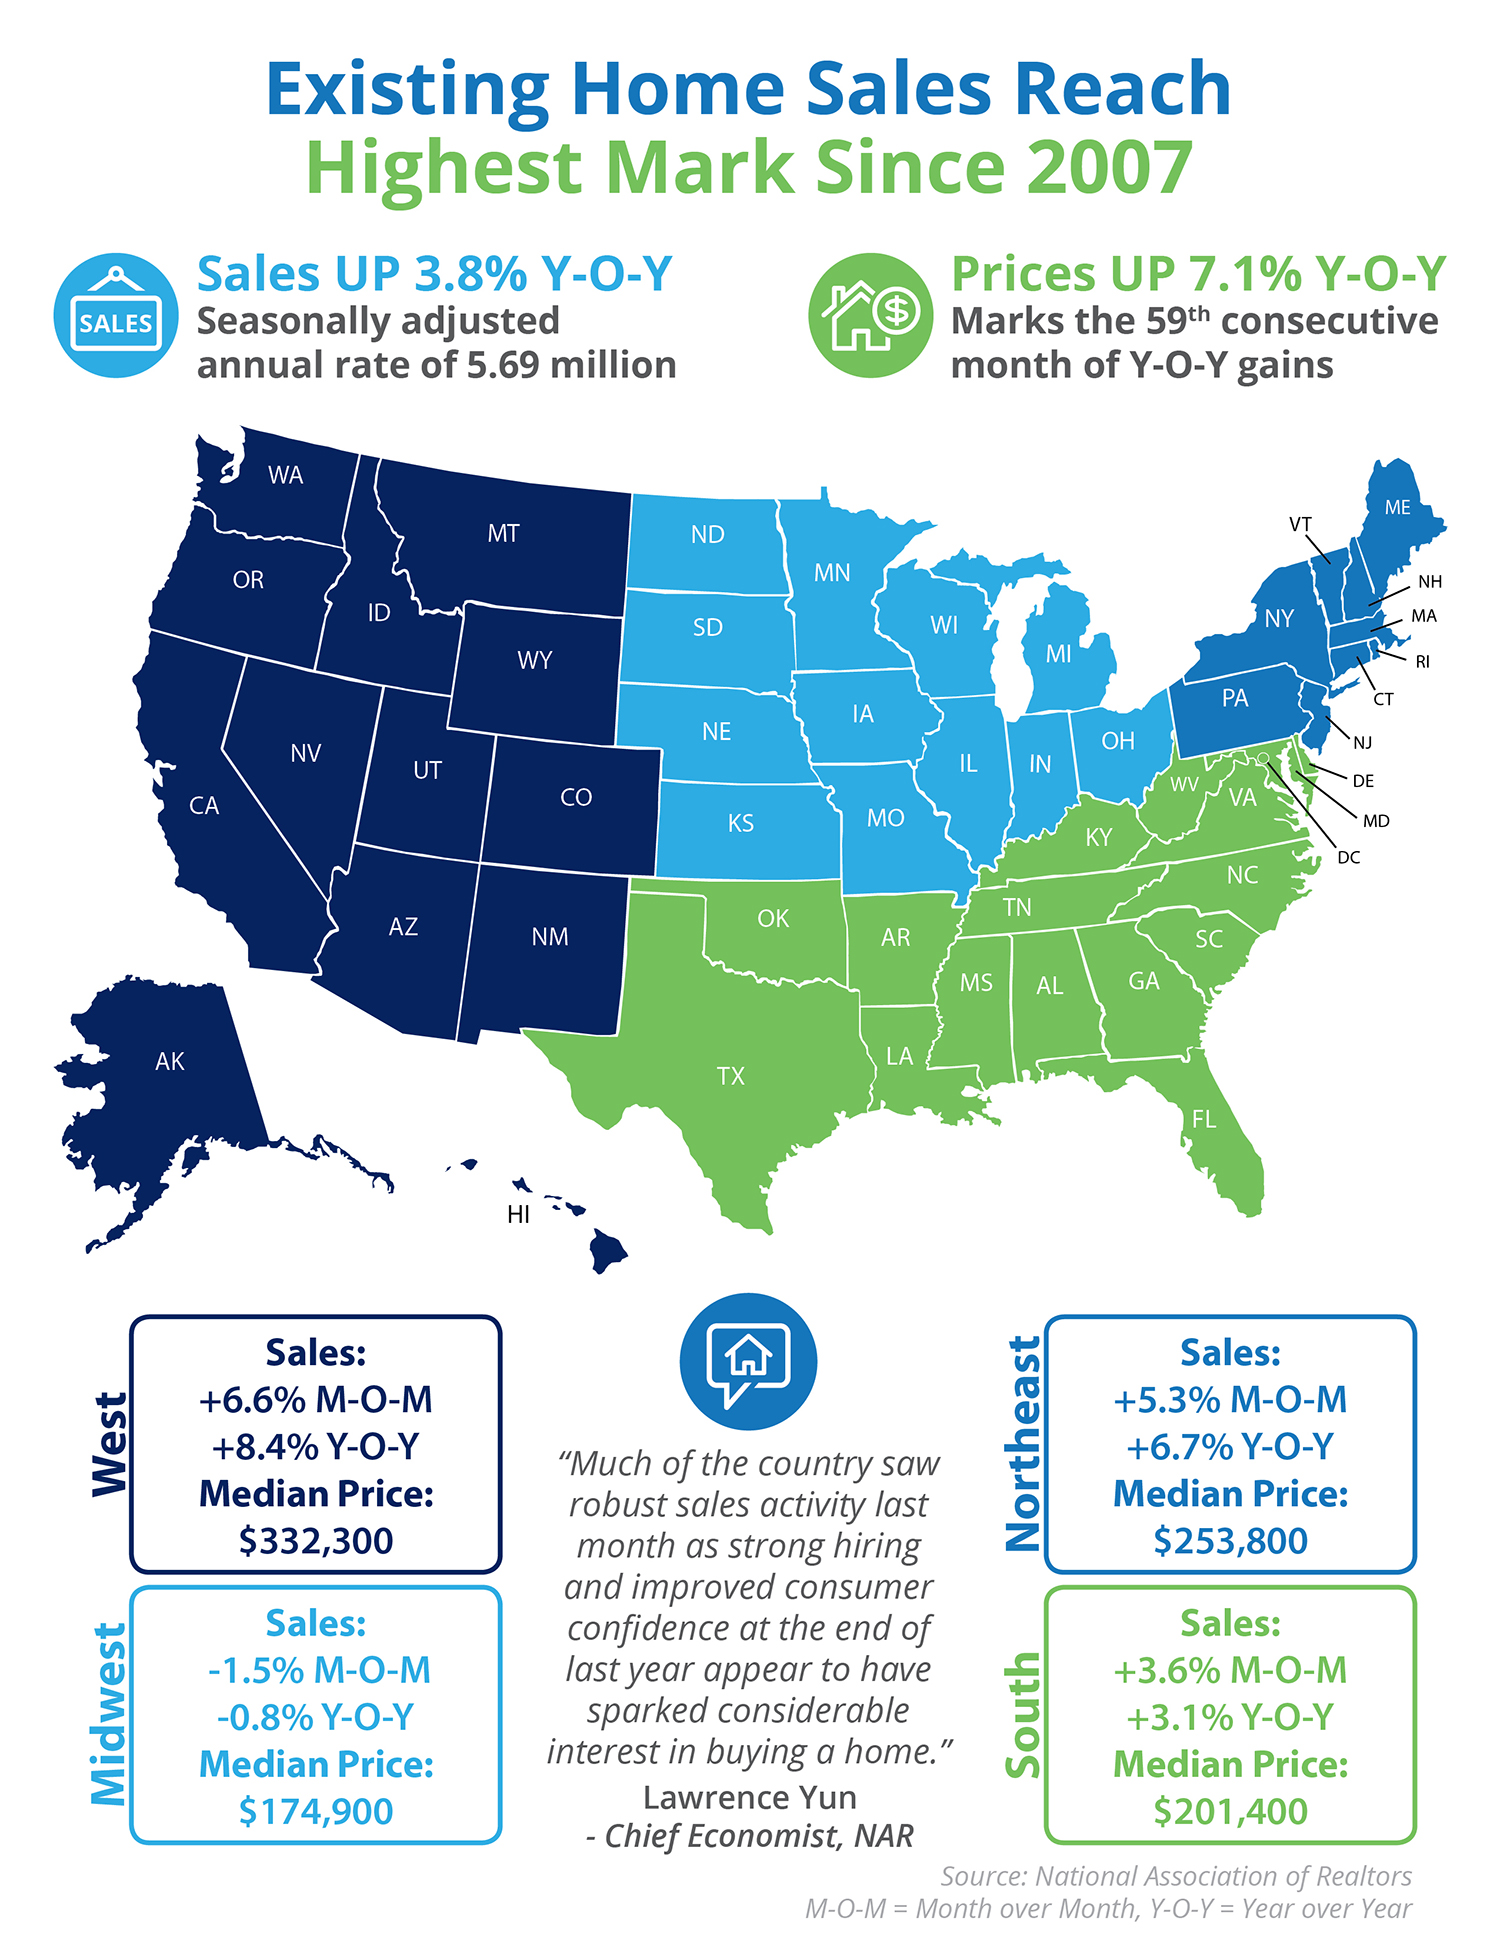 Existing Home Sales Reach Highest Mark Since 2007 [INFOGRAPHIC] | Simplifying The Market